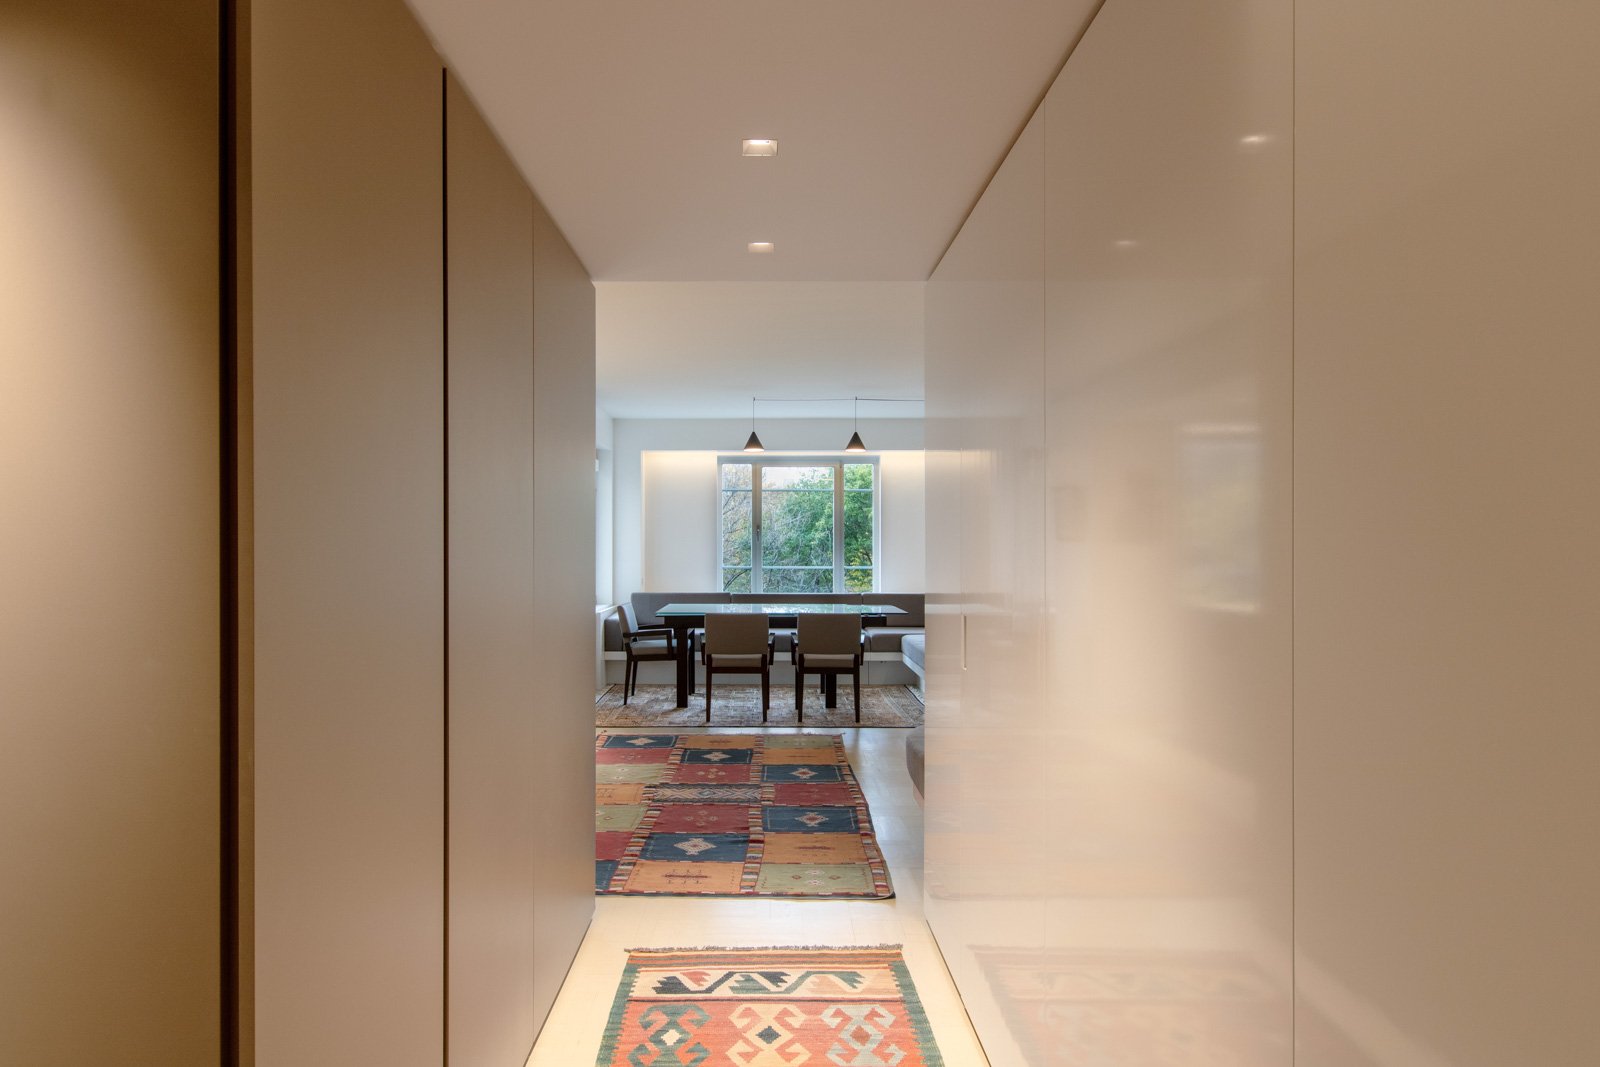 01-res4-resolution-4-architecture-modern-apartment-renovation-nyc-pied-a-terre-entry-foyer-hall-custom-millwork-hidden-doors.jpg